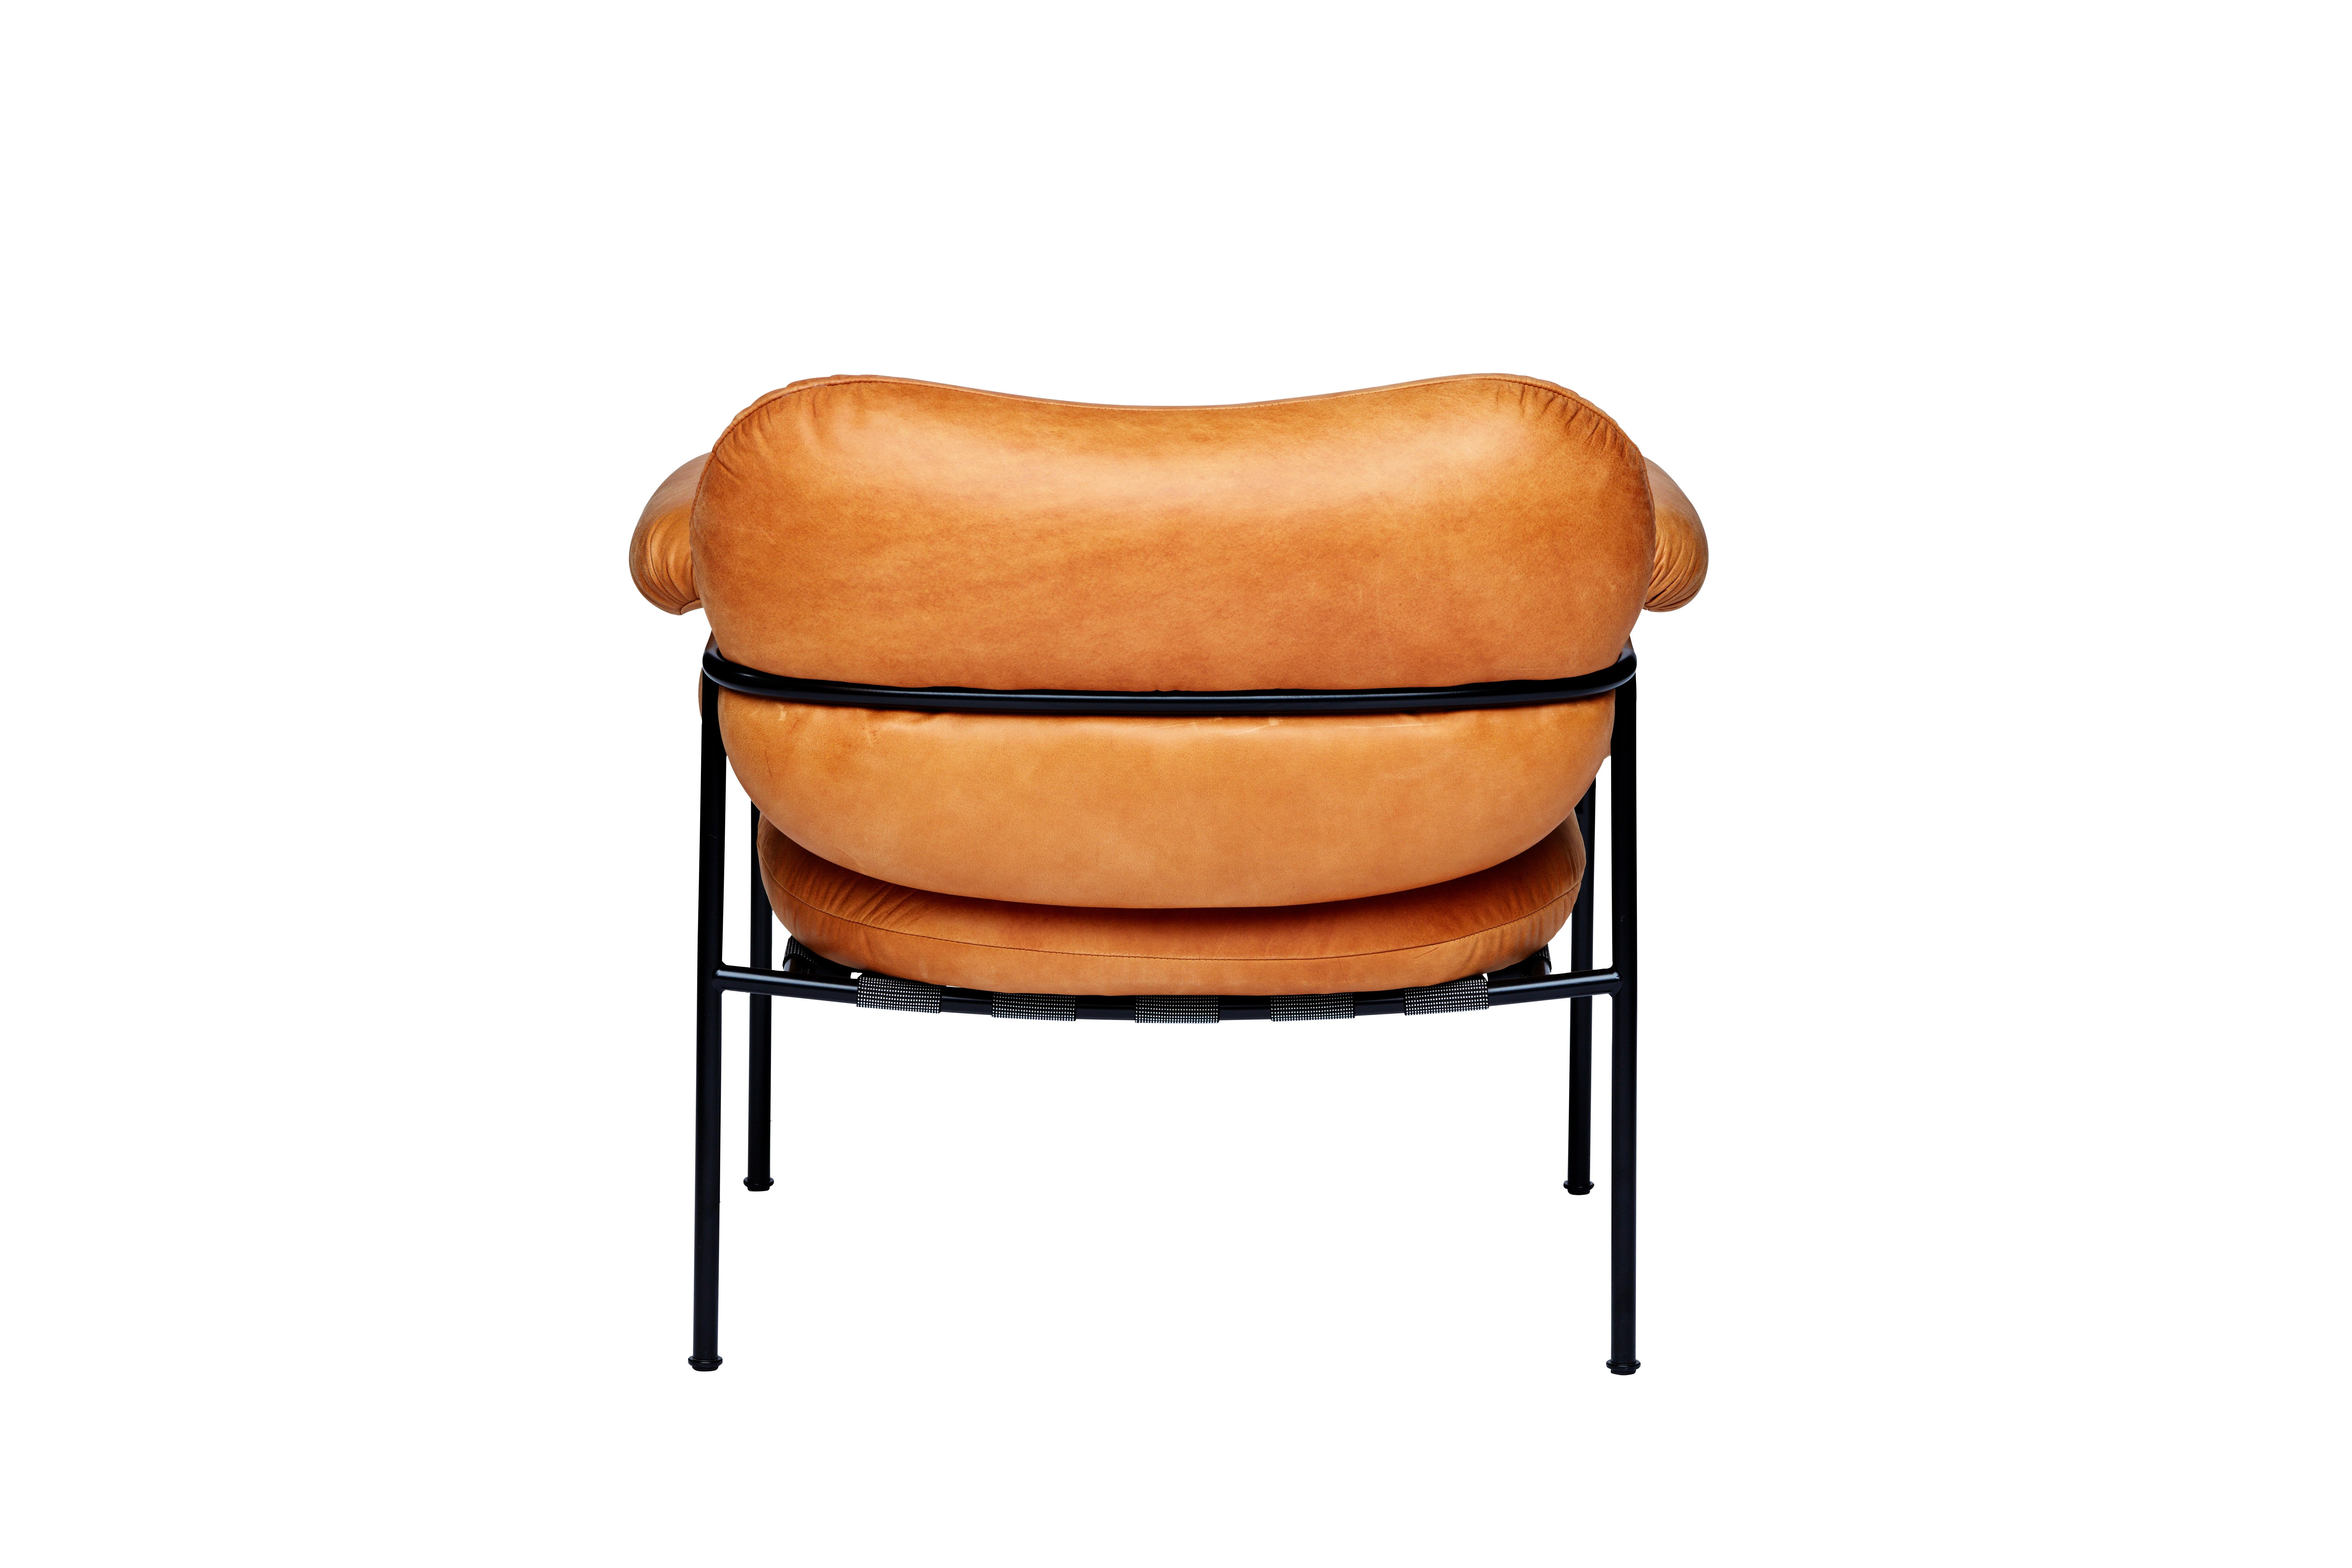 Bollo Armchair by Andreas Engesvik for FOGIA

Model shown on main images: Black steel legs + Leather: Vintage, Cognac

Width: 81cm /32in
Depth: 81cm /32in
Height: 71cm /28in
Seat Height: 42.5cm /17in
Seat Depth: 54cm / 21in

The iconic Bollo